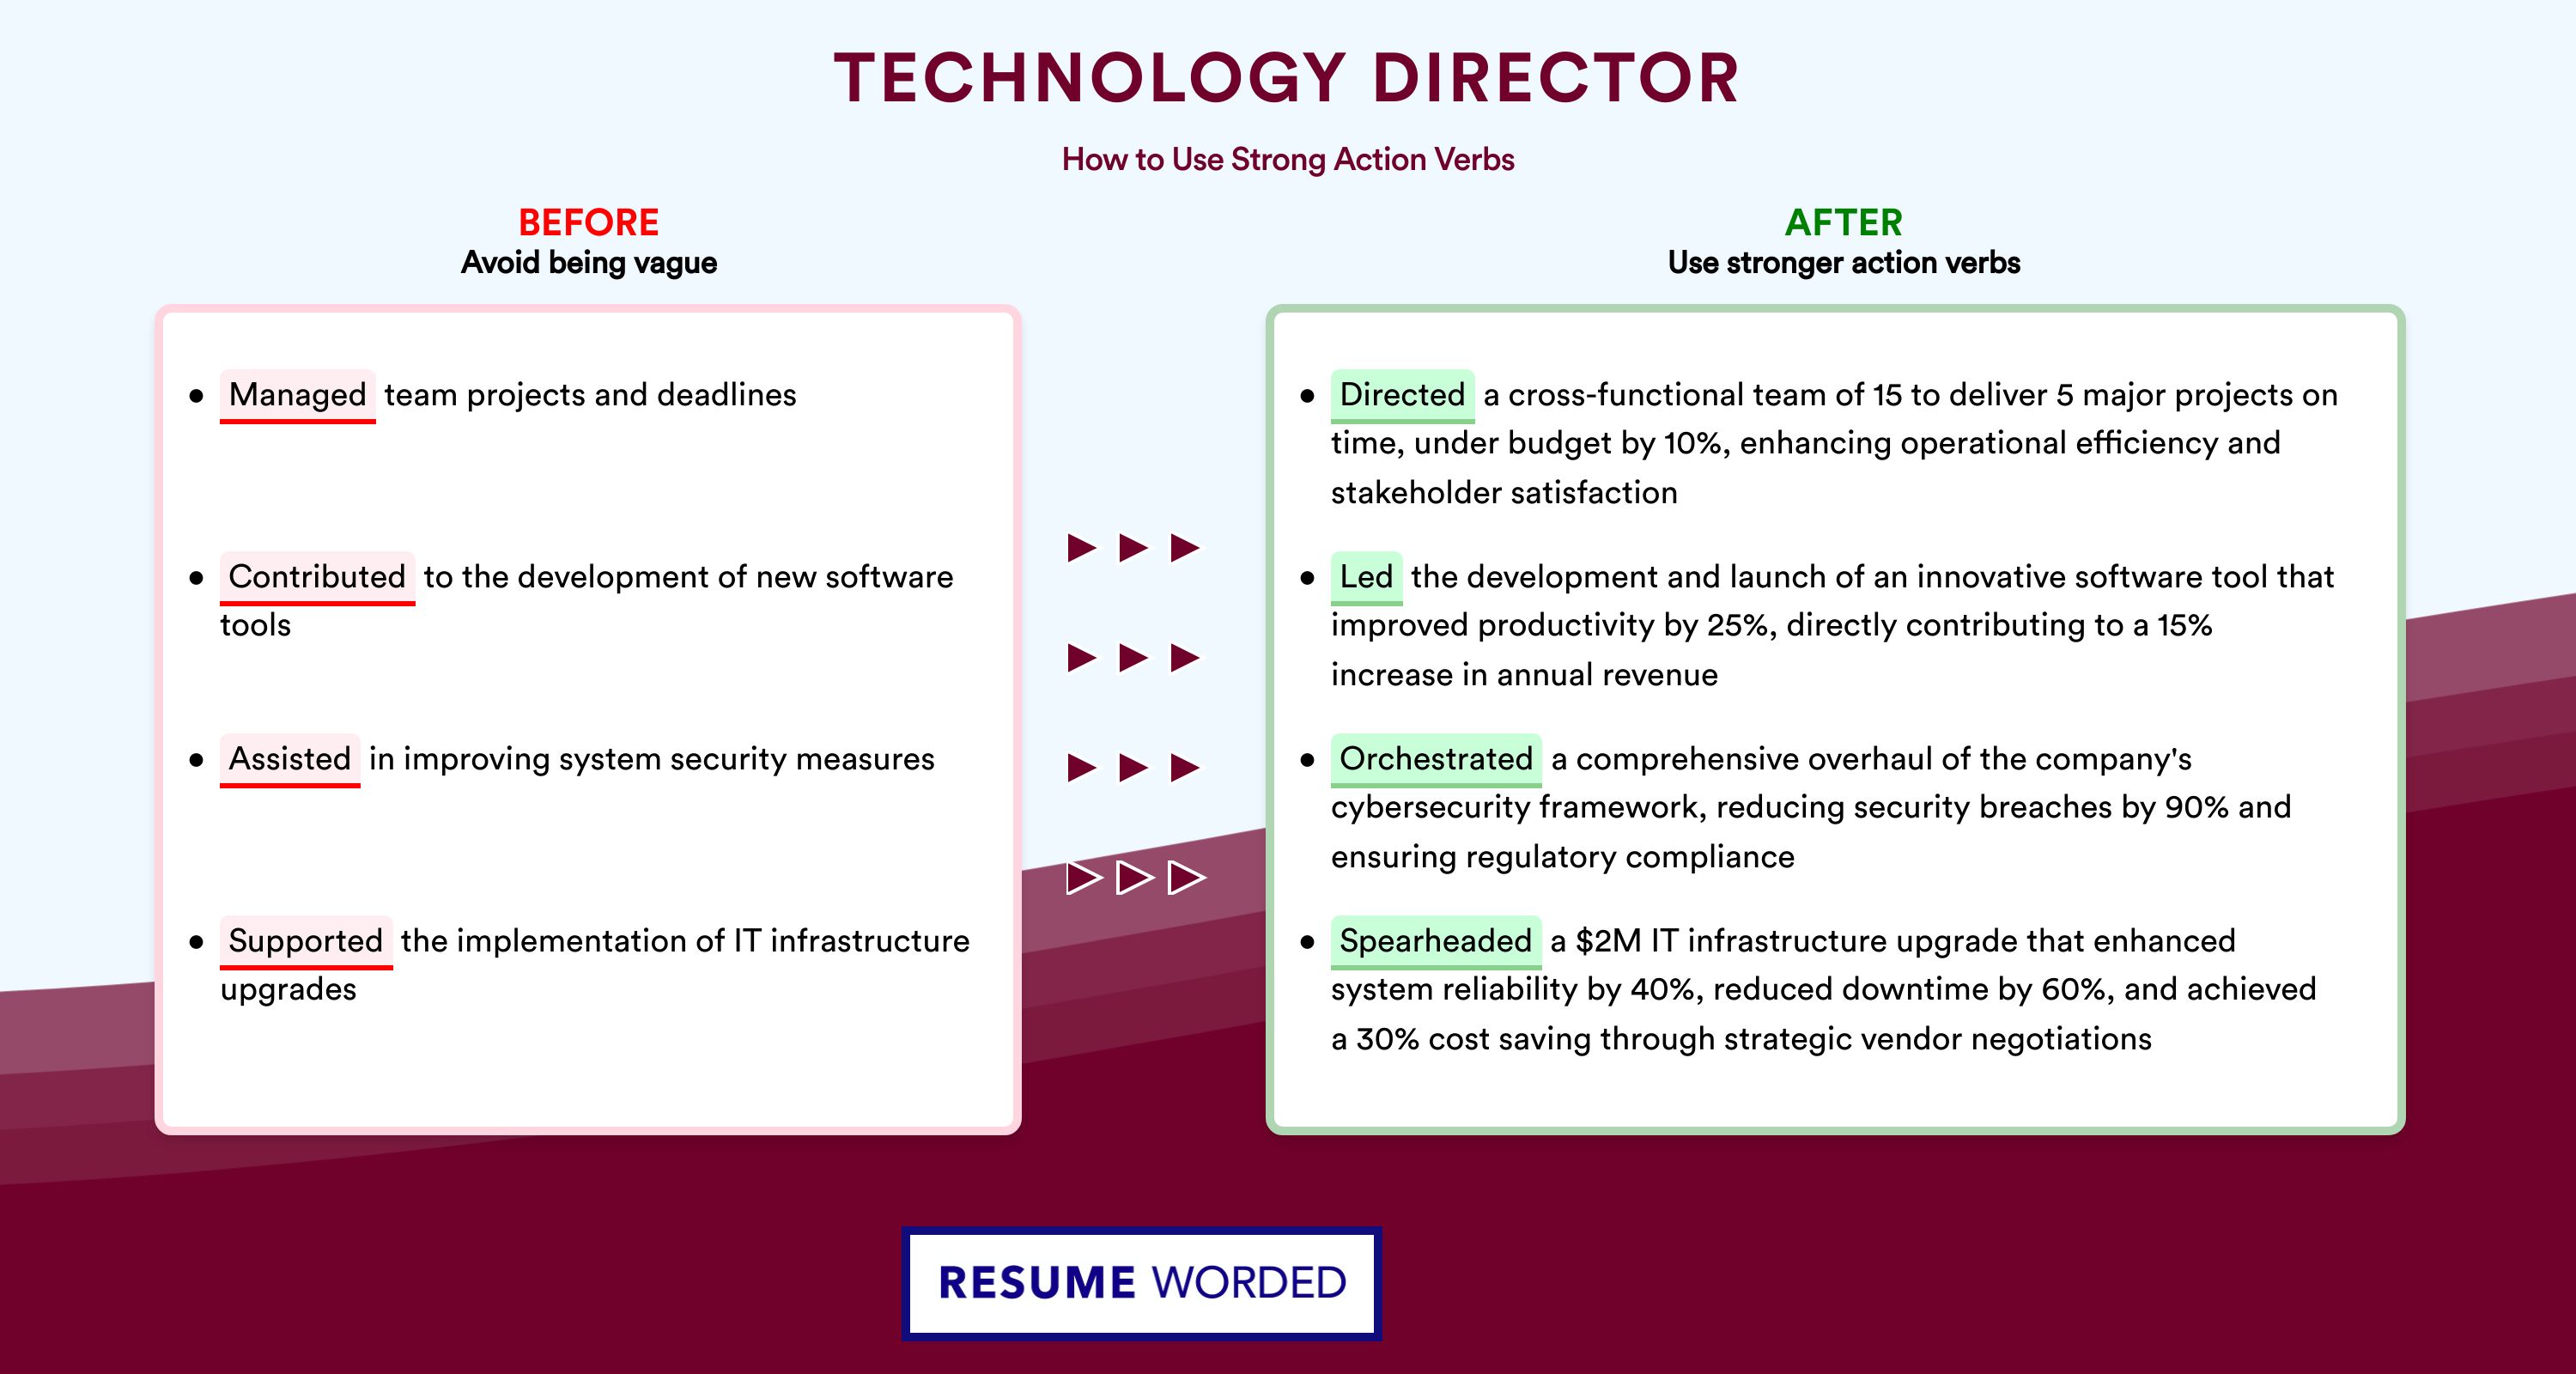 Action Verbs for Technology Director